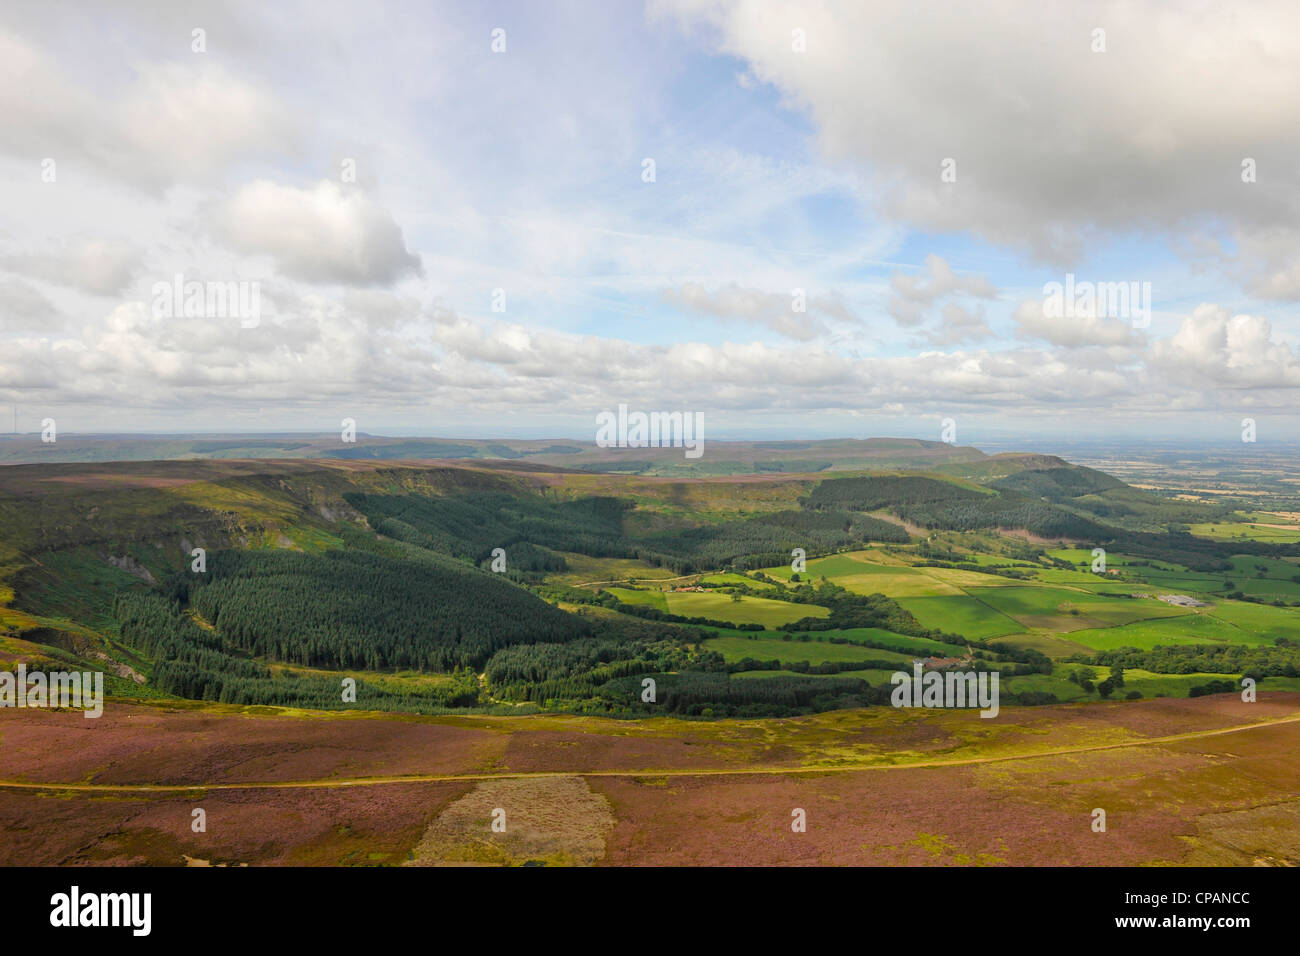 Aerial view of landscape on the edge of the Yorkshire Moors national Park Stock Photo